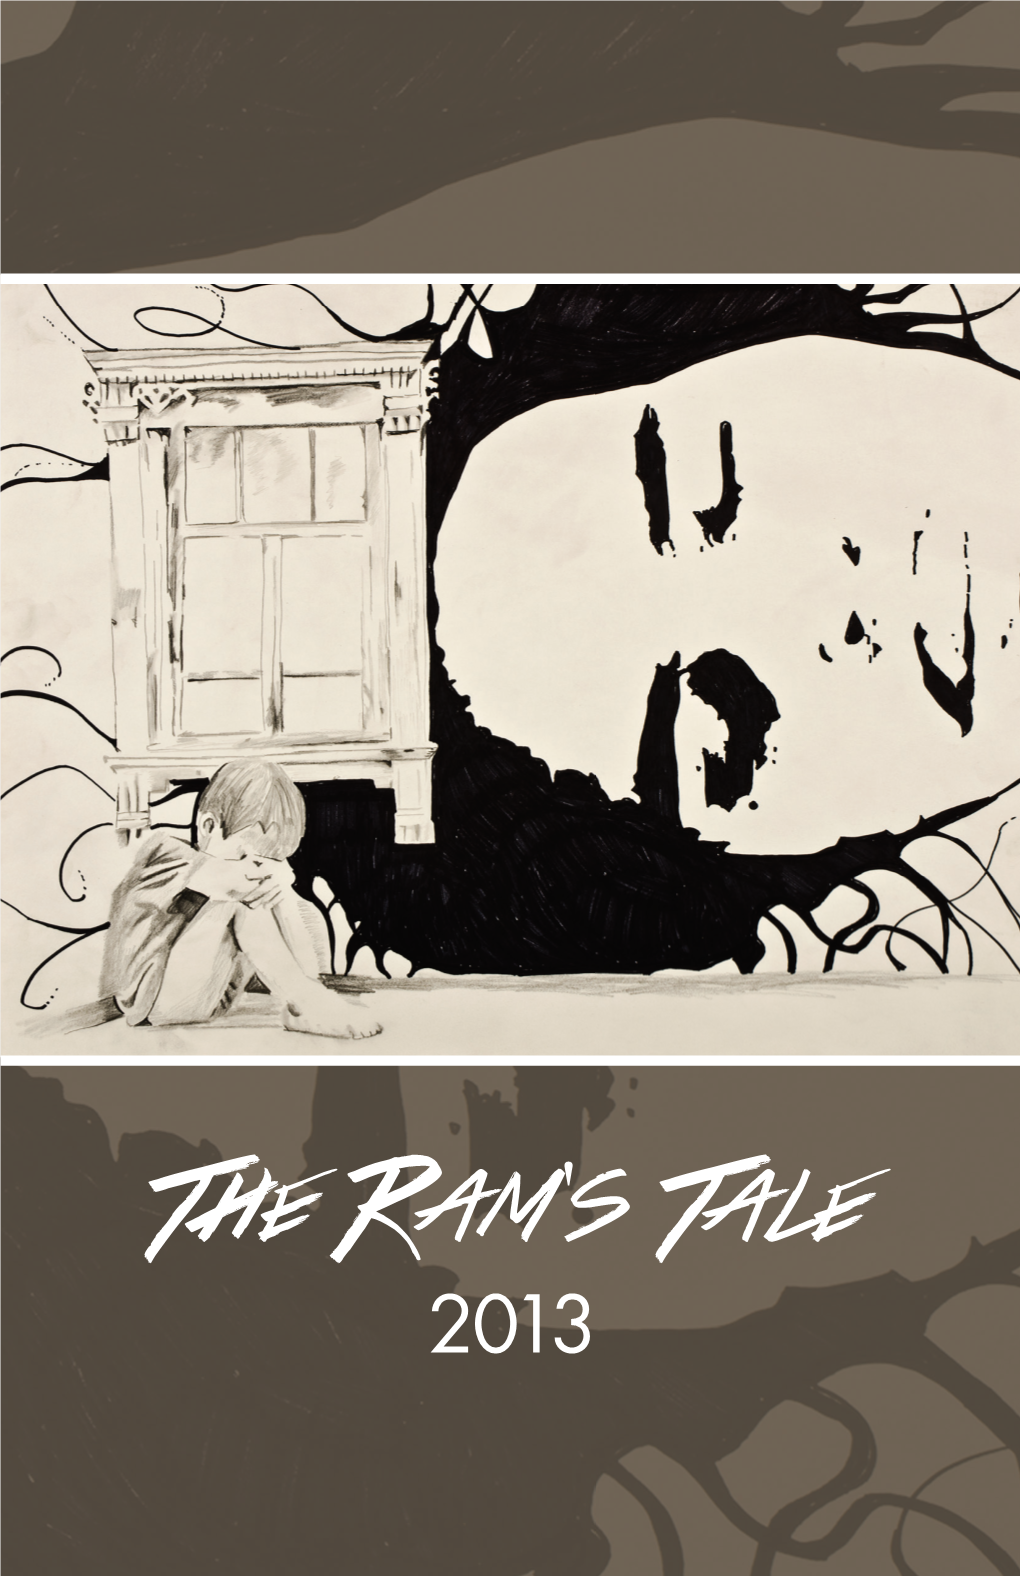 The Ram's Tale 2013.Indd